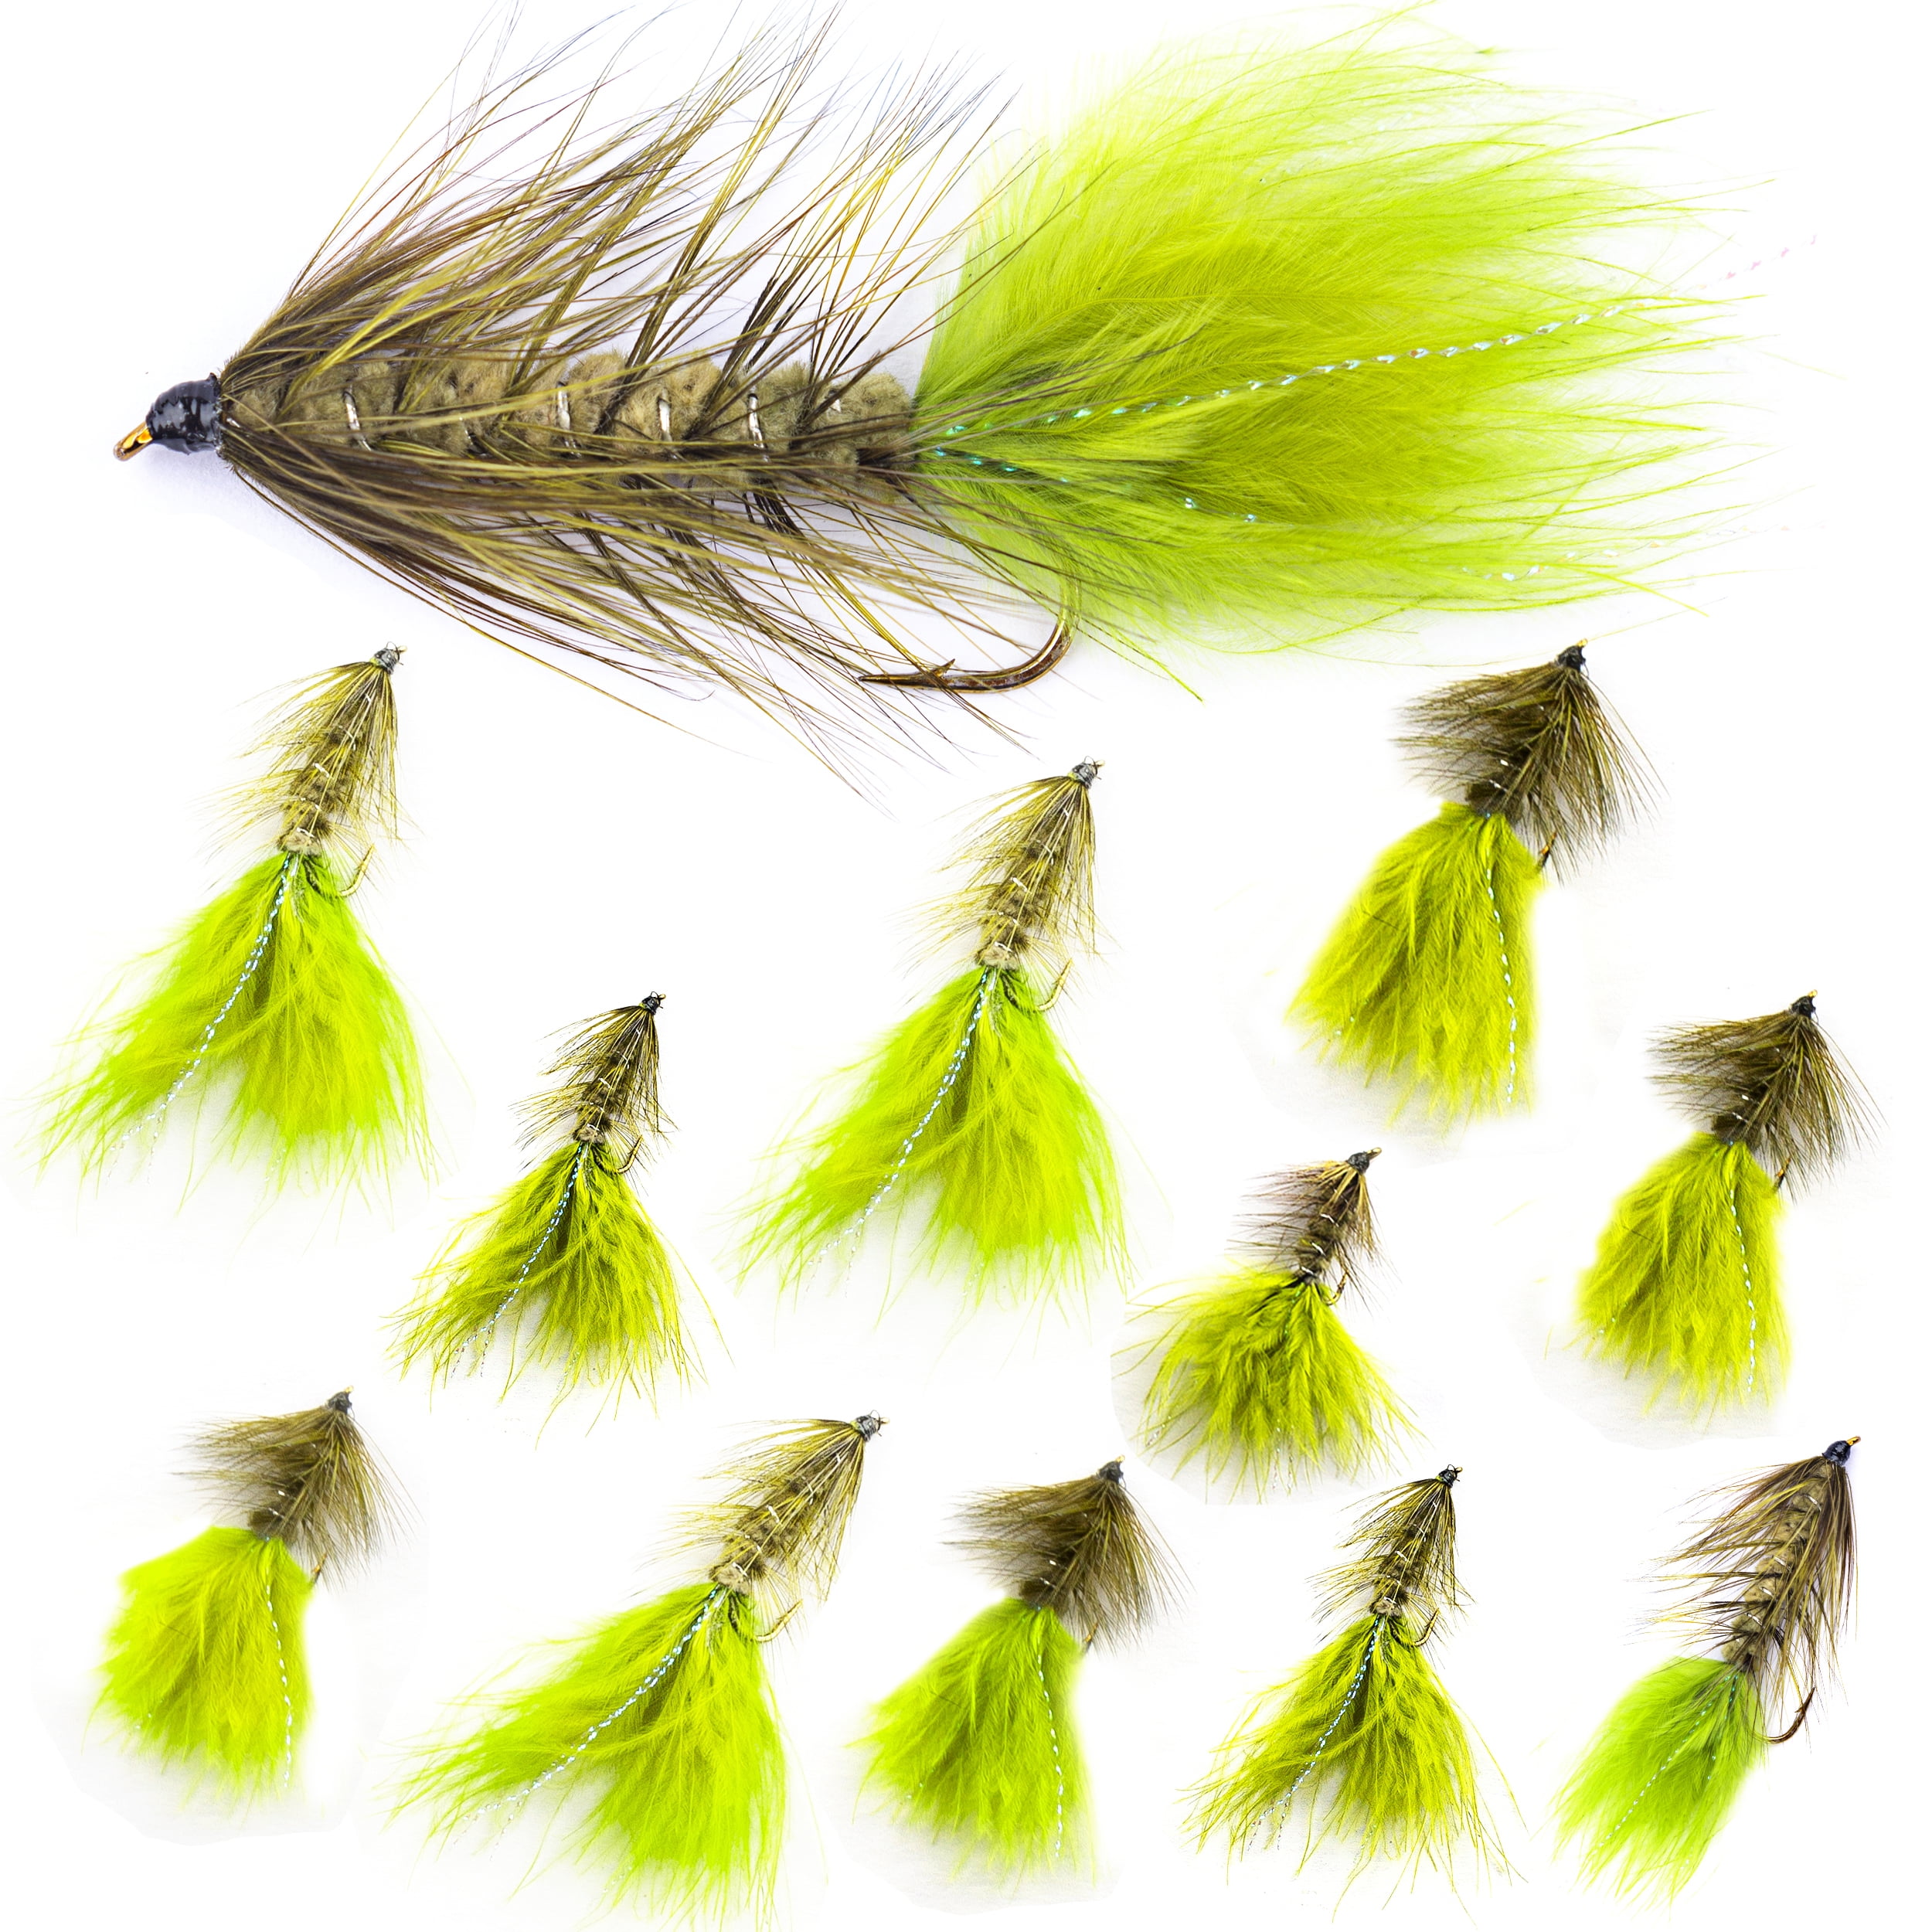 Gold Head Damsel Nymphs Trout Fly Fishing Flies lures streamers Size 14 